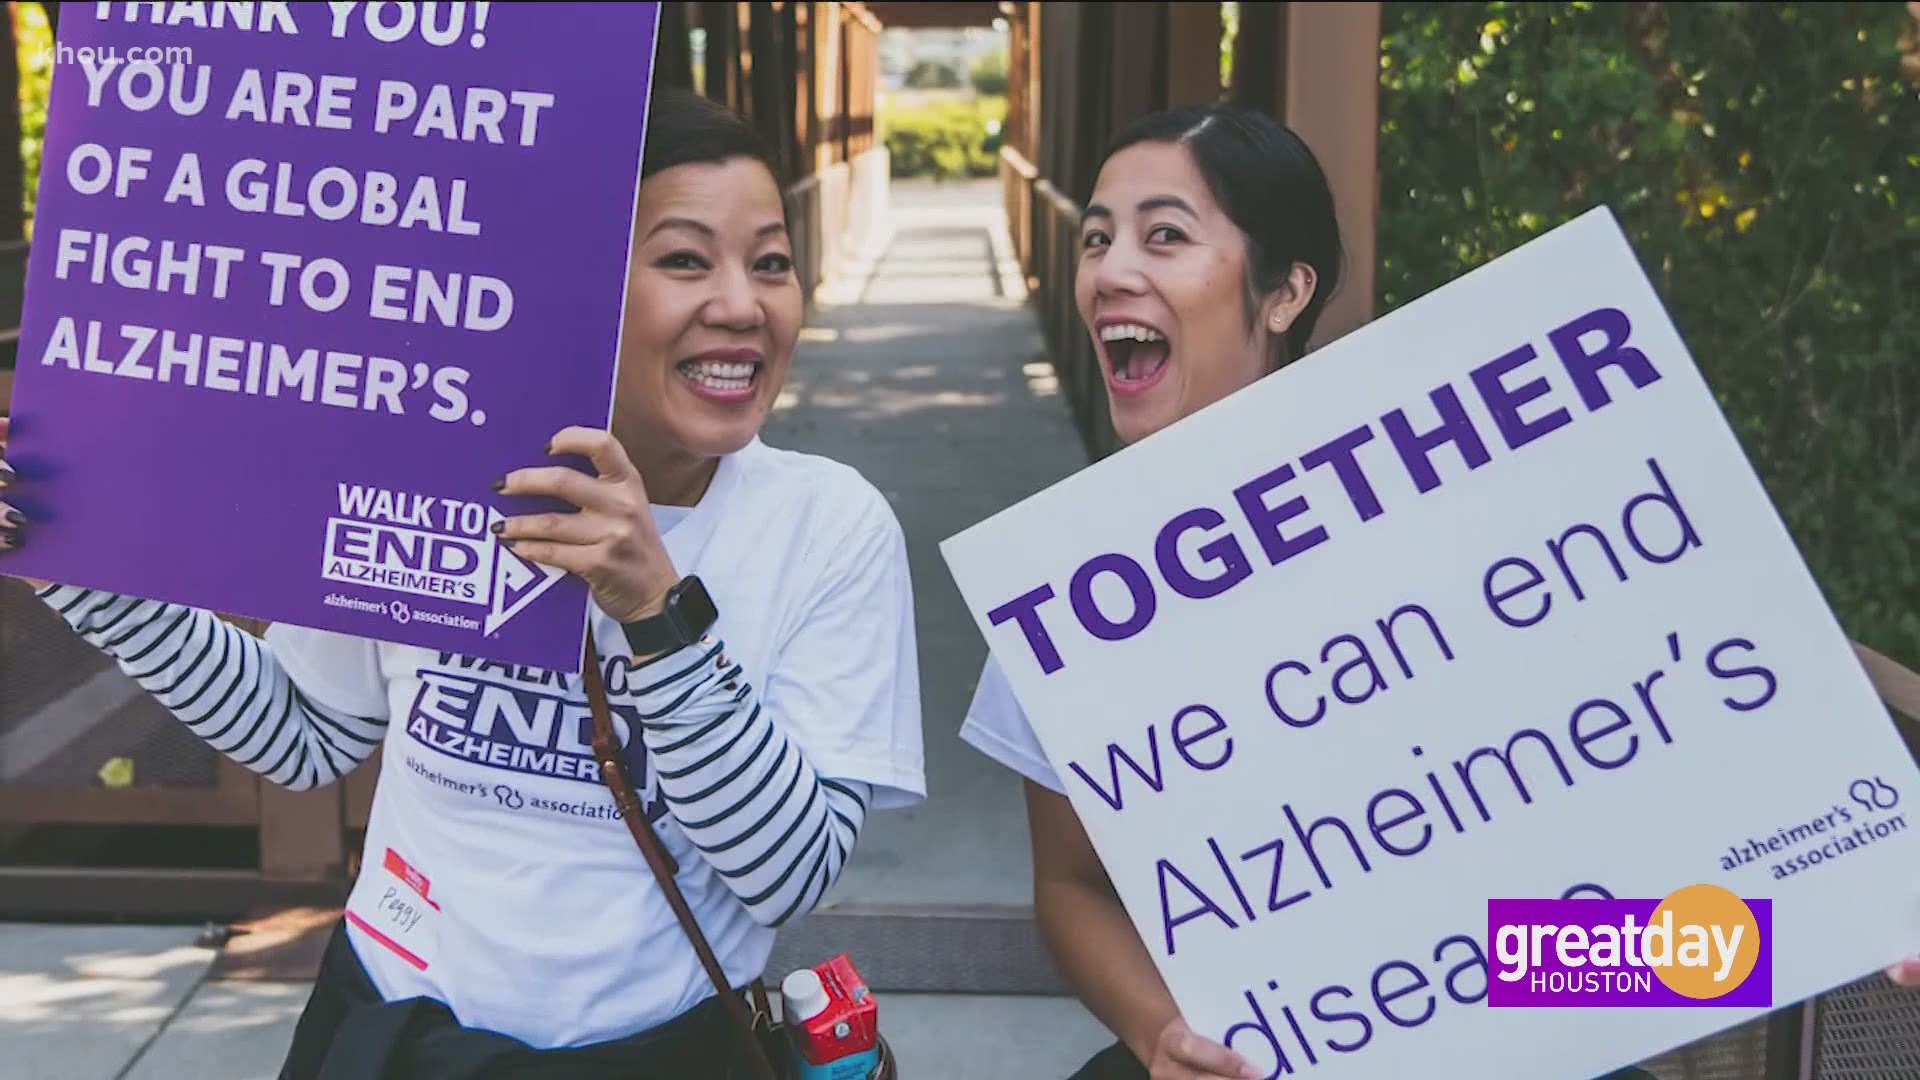 Richard Elbein, Executive Director of Alzheimer's Association, Houston & Southeast Texas Chapter is raising funds to provide critical care and support.